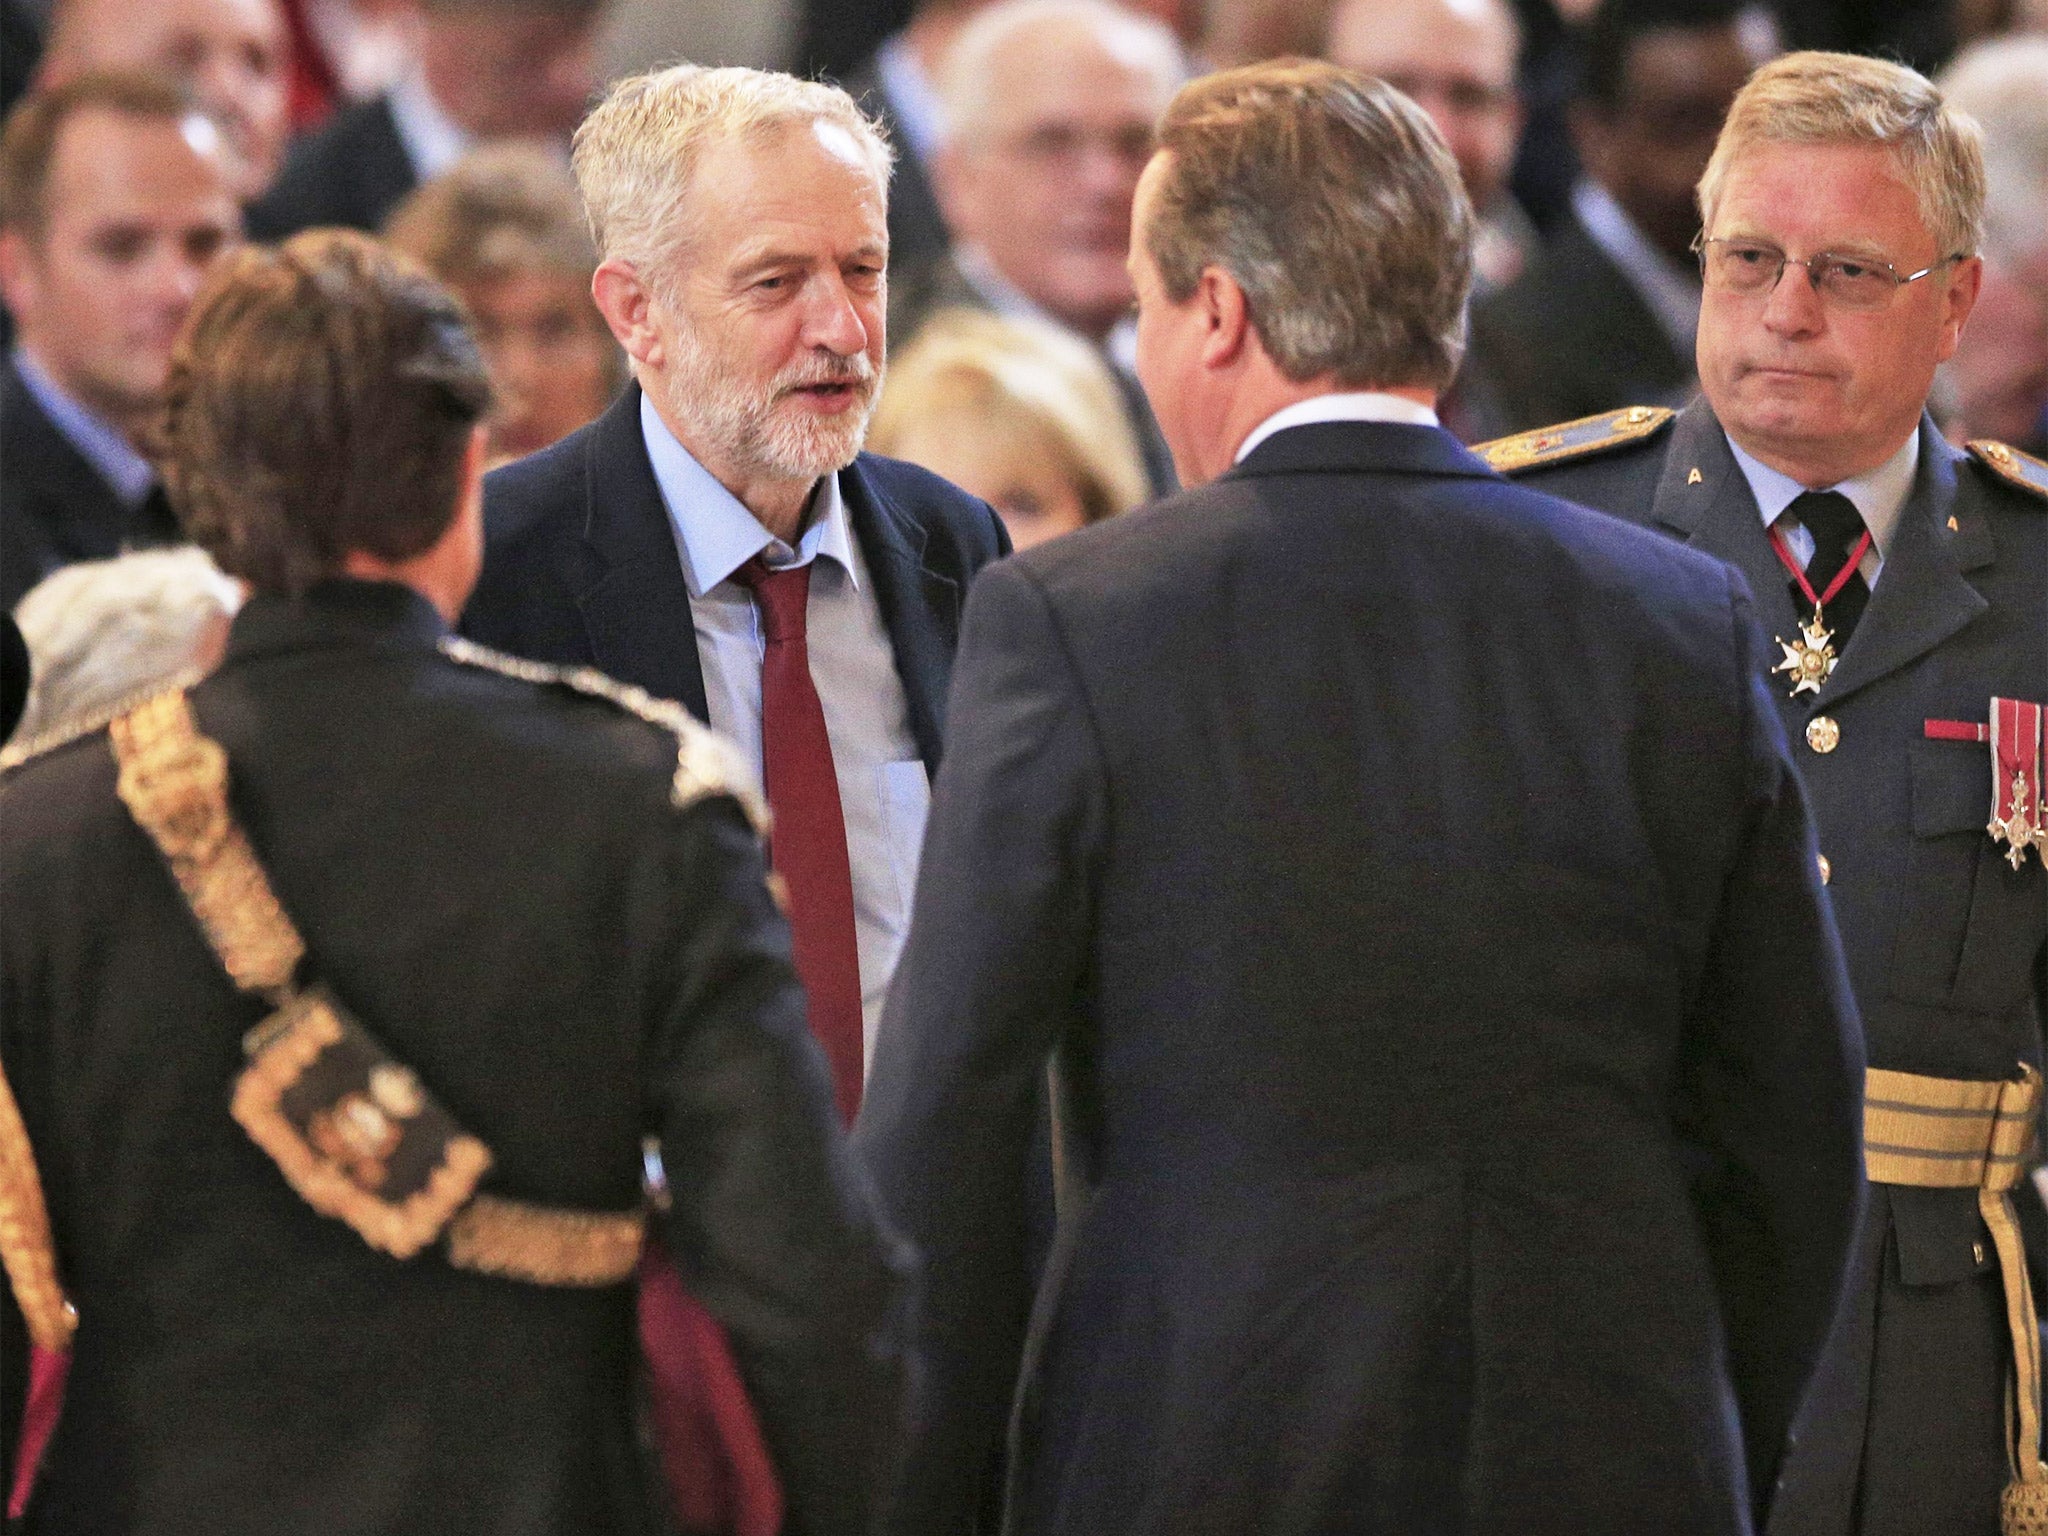 Jeremy Corbyn is greeted by David Cameron at St Paul’s Cathedral